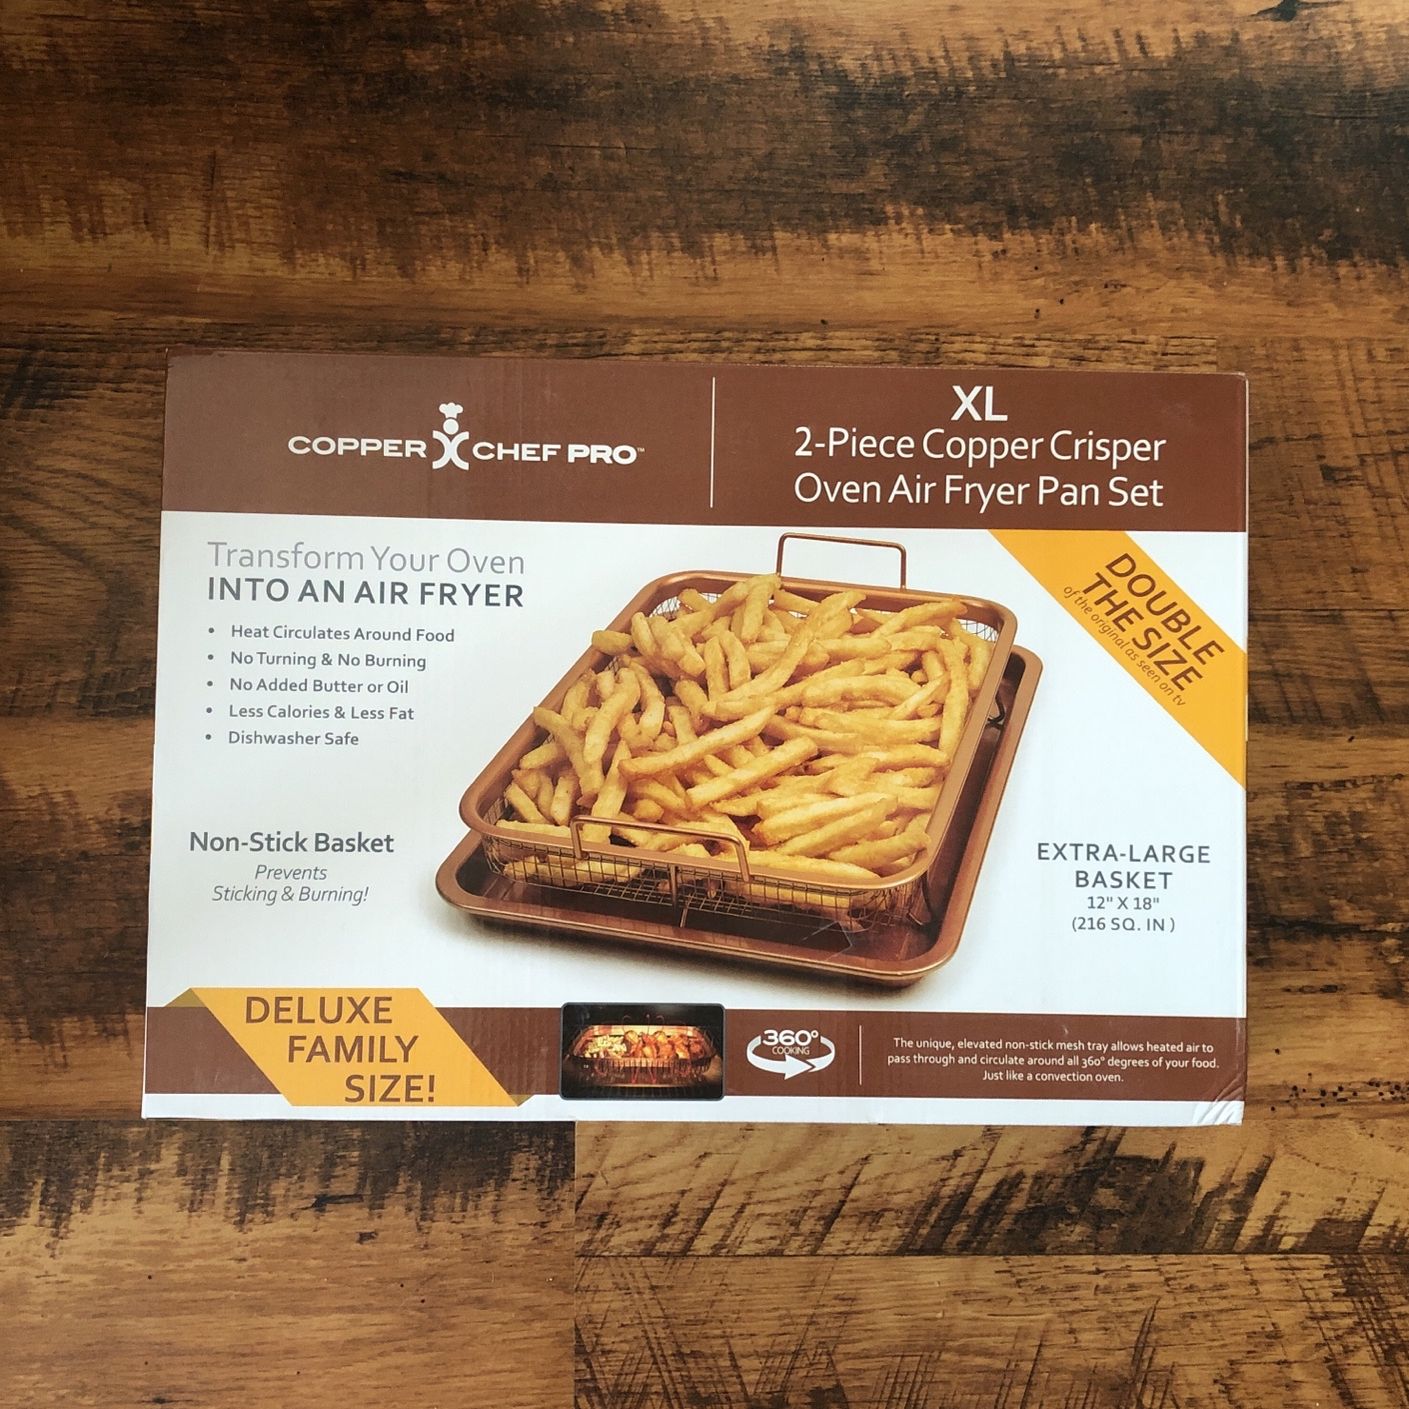 CAN THE COPPER CHEF COPPER CRISPER TURN MY OVEN INTO AN AIR FRYER